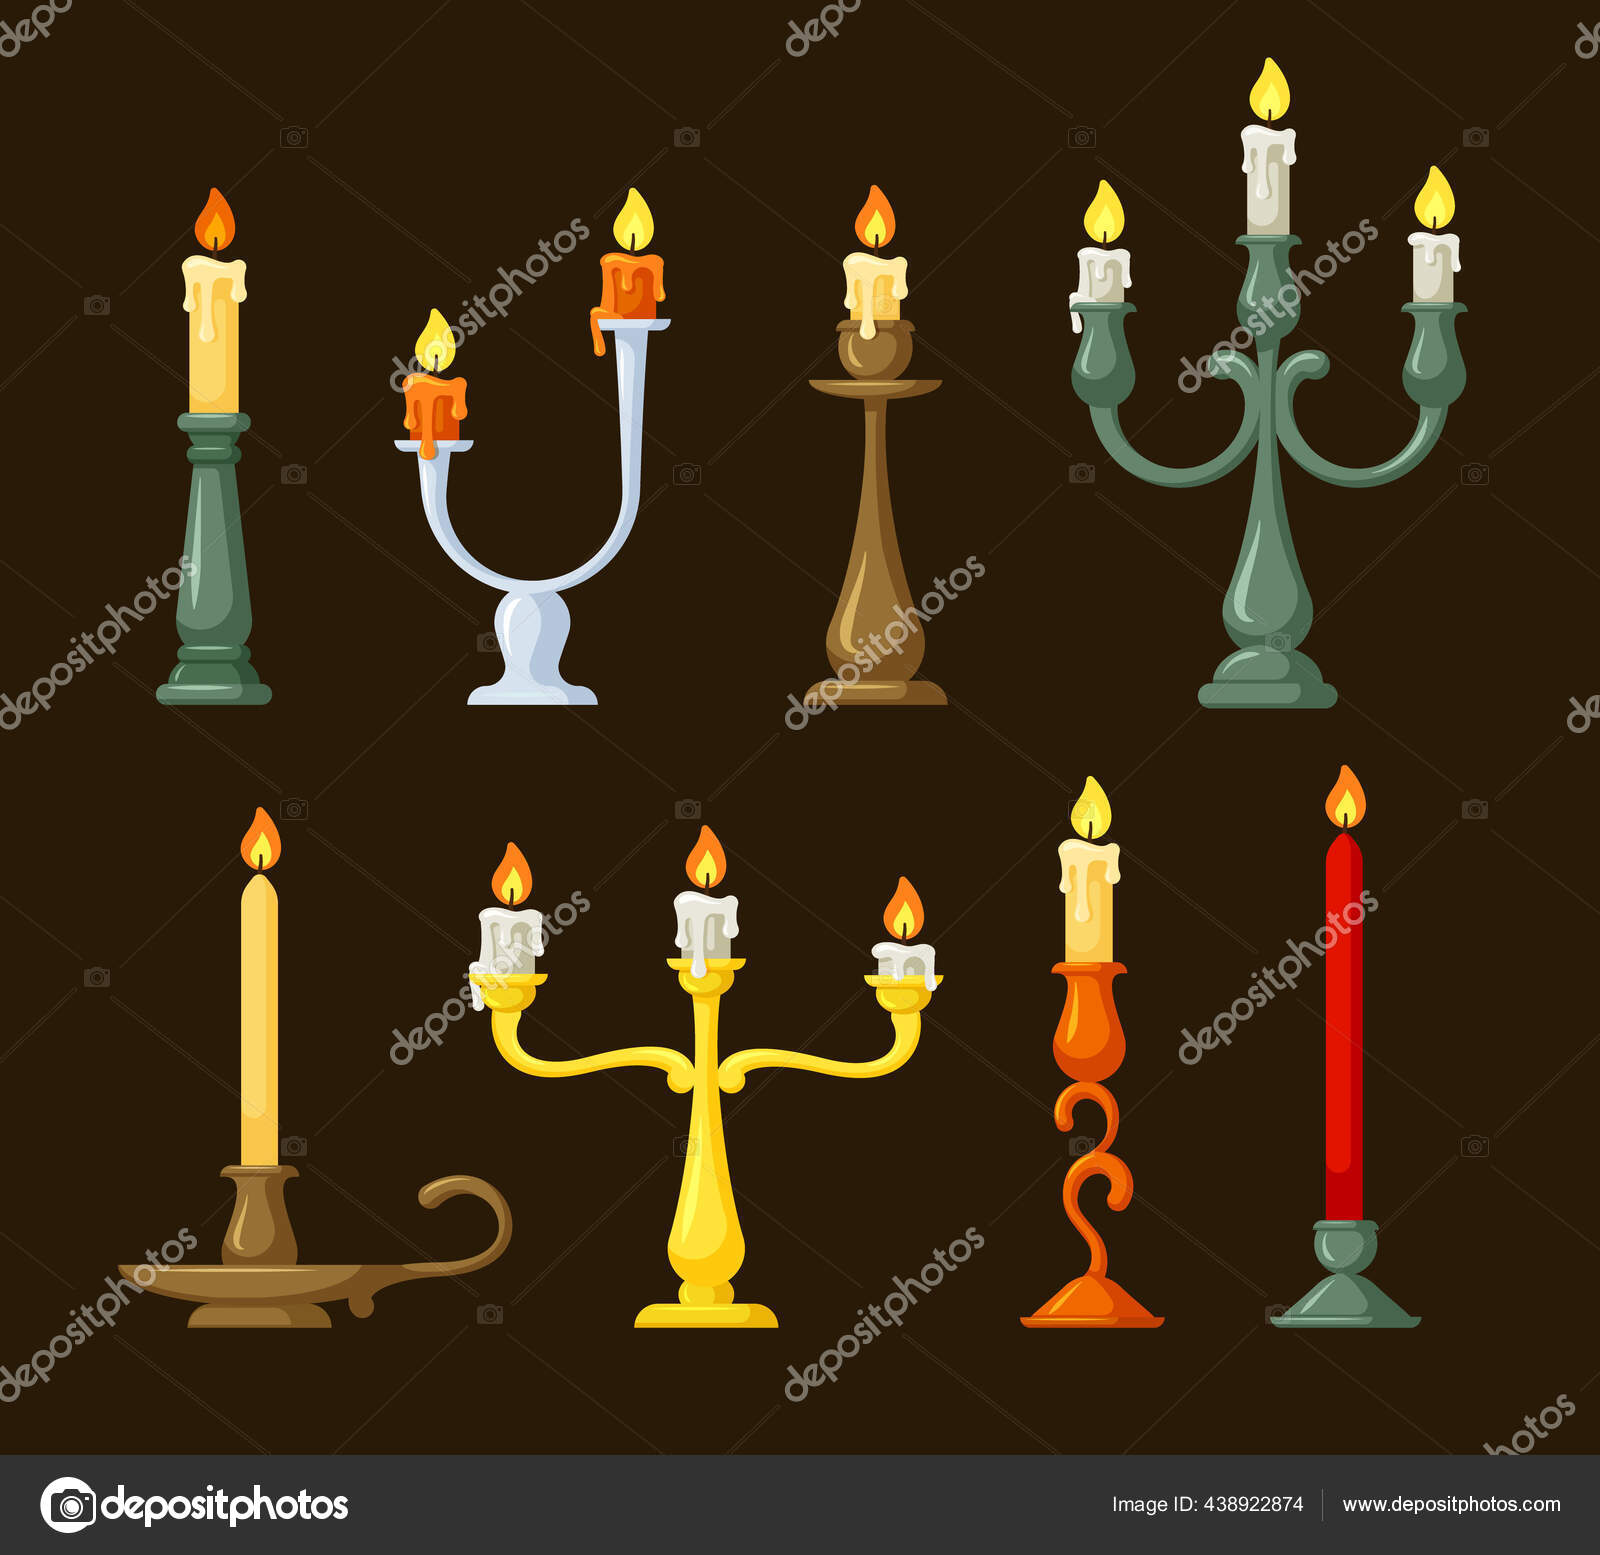 Vintage candlesticks set. Old green twisted wax candle holders in elegant  victorian style decorative yellow bronze and decorations traditional  lighting before introduction electricity. Vector decor. Stock Vector by  ©Alexcardo 438922874